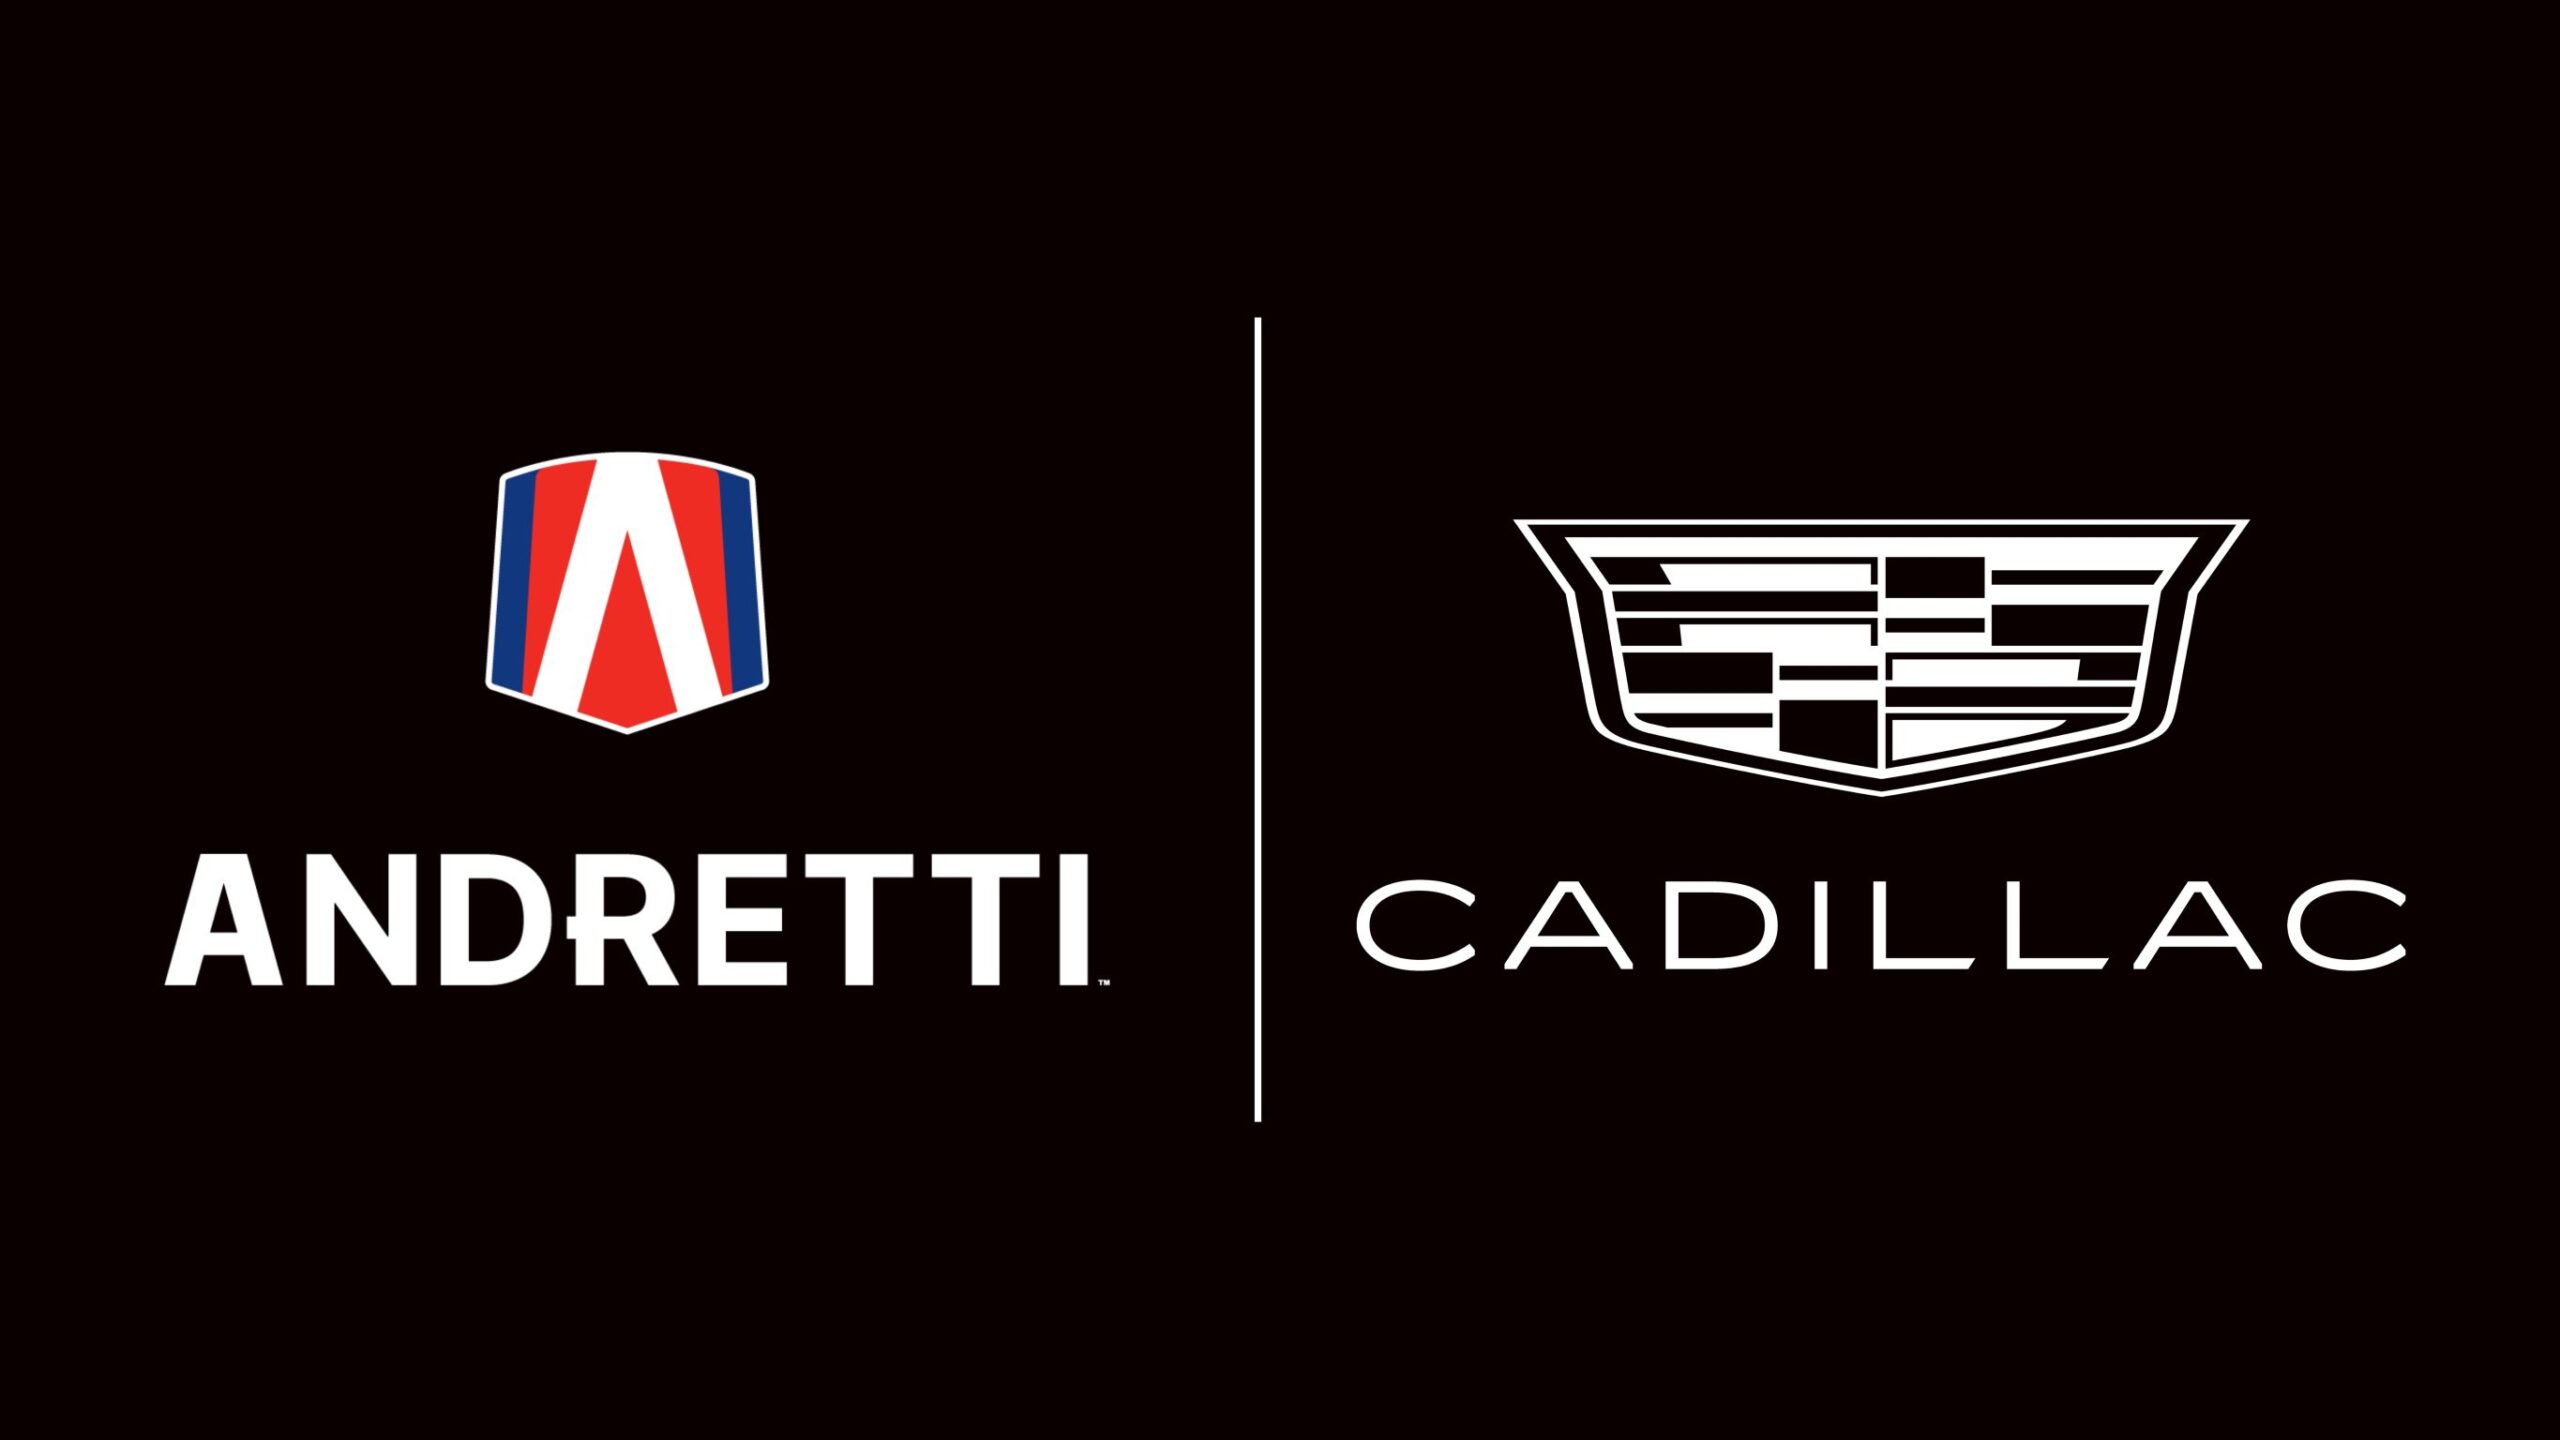 A photo of both the Cadillac and Andretti logos side by side.